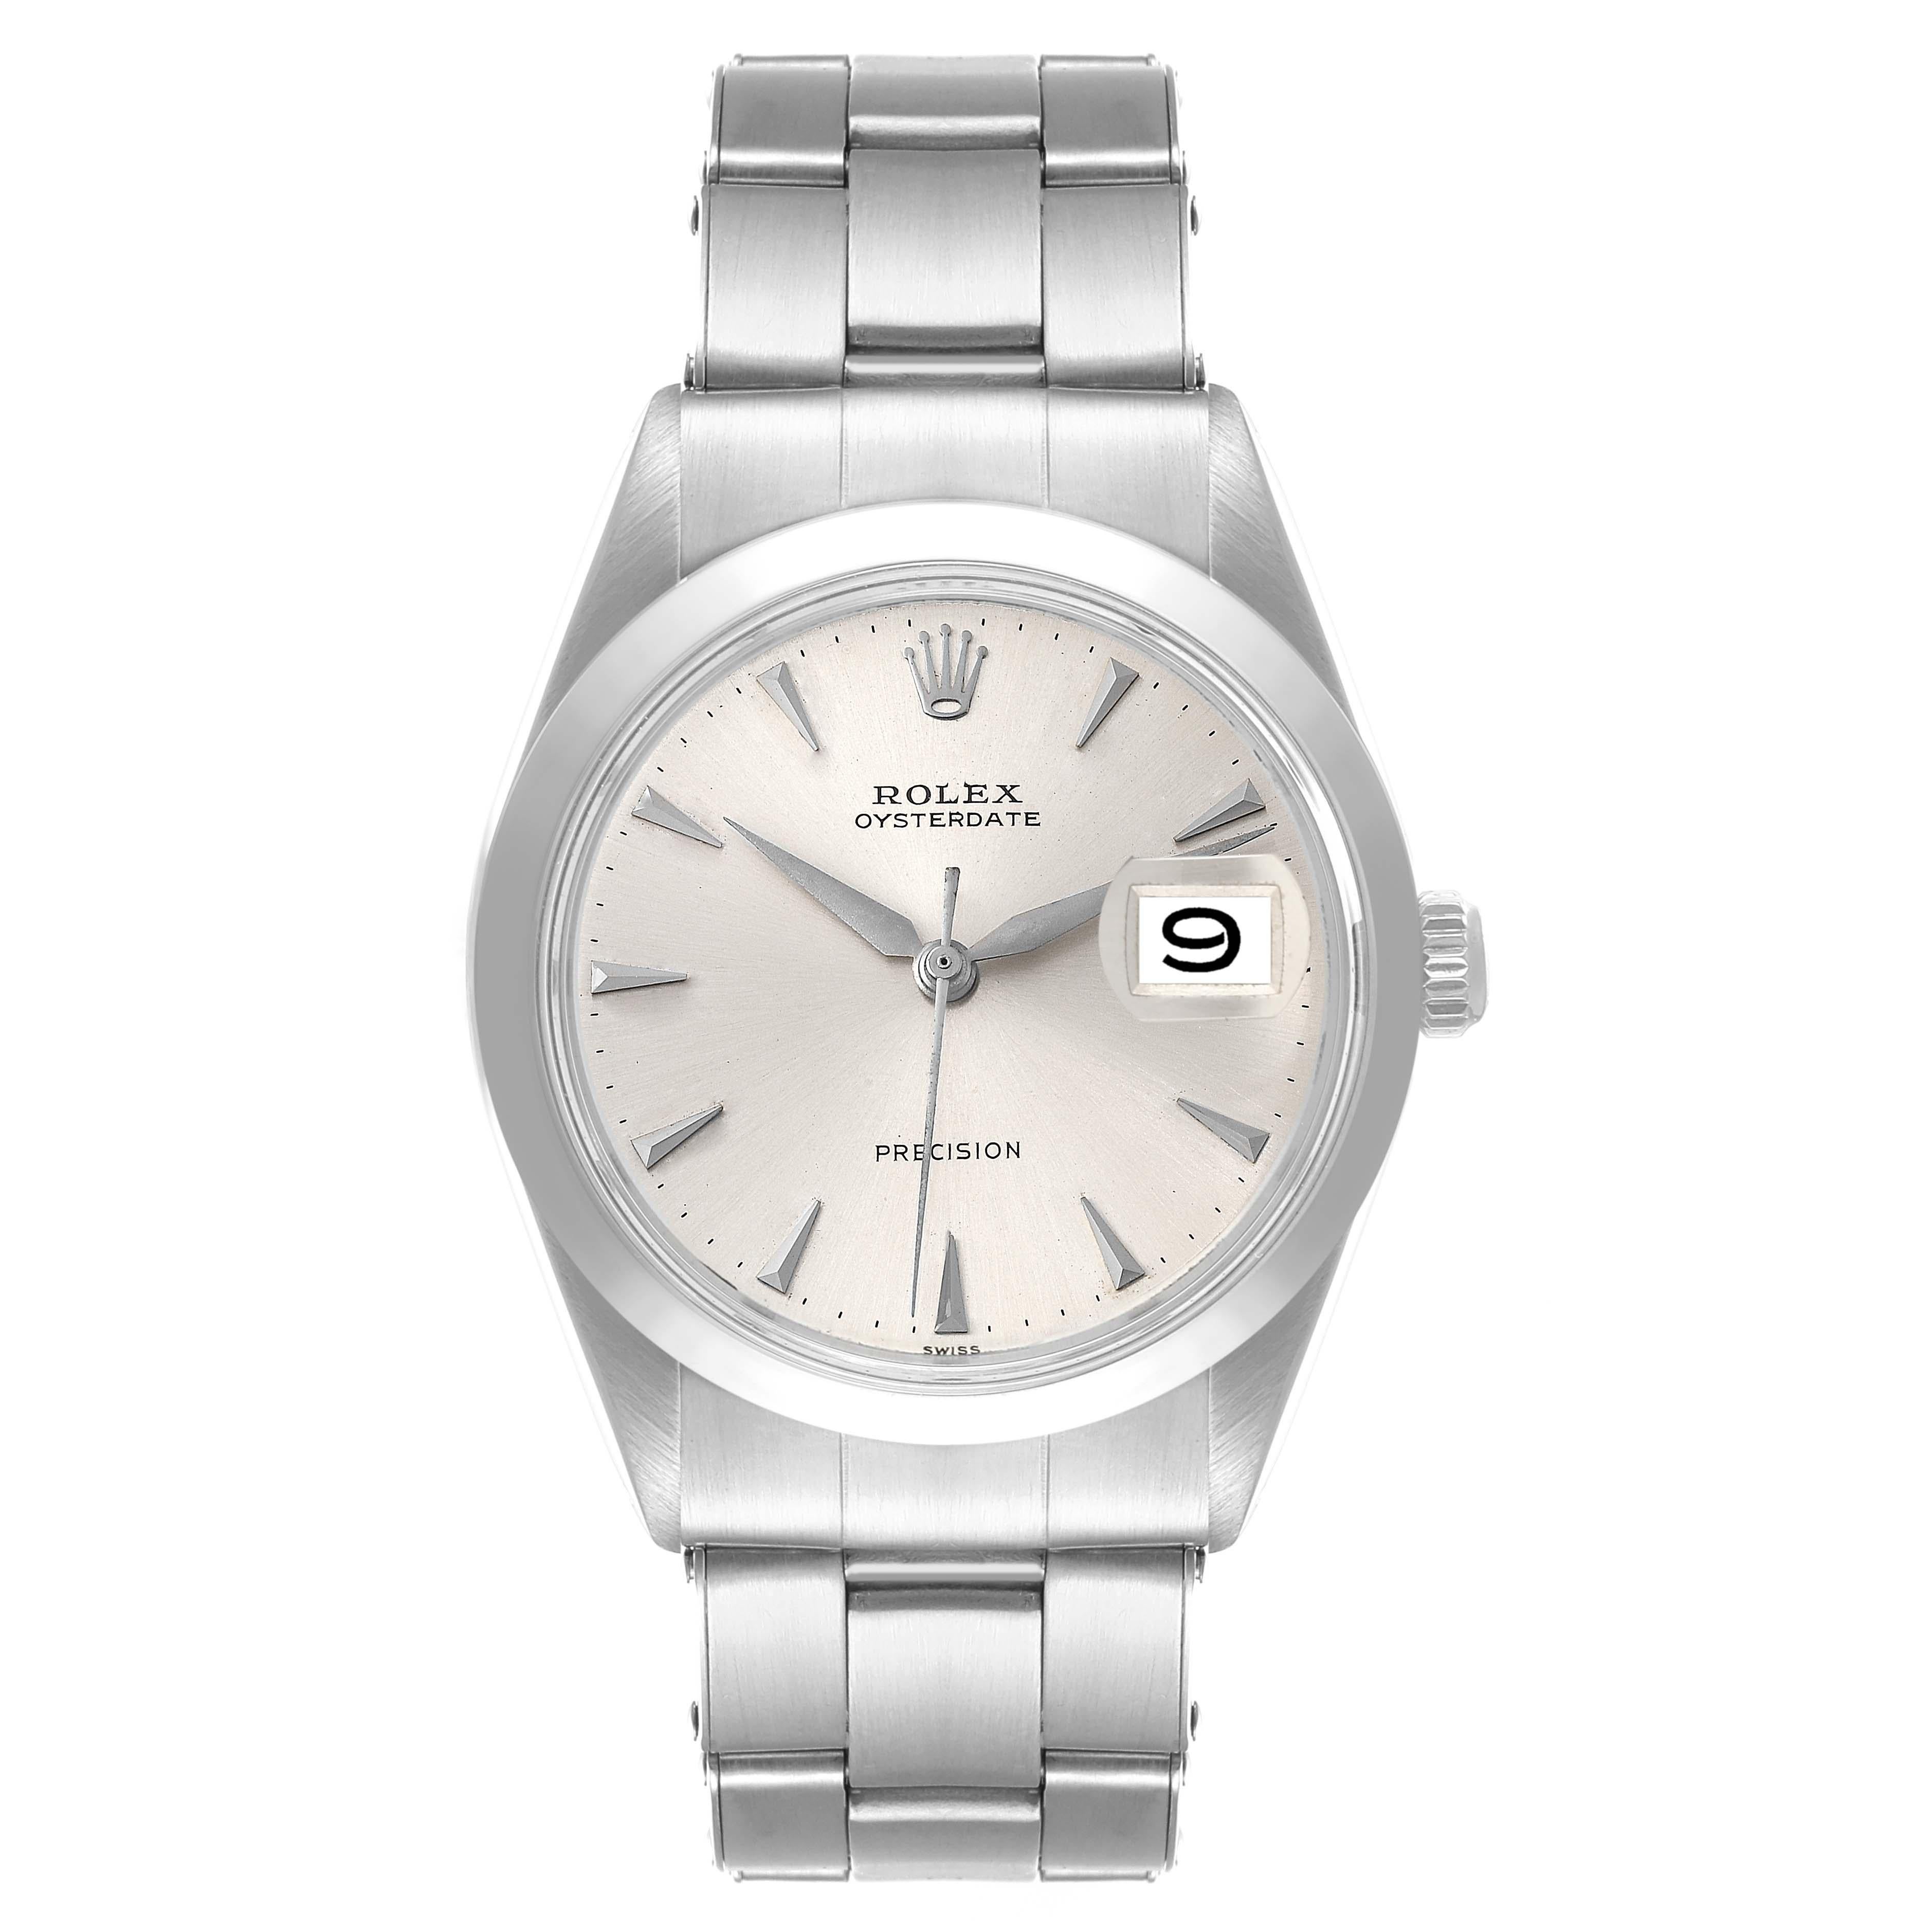 Rolex OysterDate Precision Silver Dial Steel Vintage Mens Watch 6694. Manual-winding movement. Stainless steel oyster case 35.0 mm in diameter. Rolex logo on the crown. Stainless steel smooth domed bezel. Acrylic crystal with cyclops magnifier.